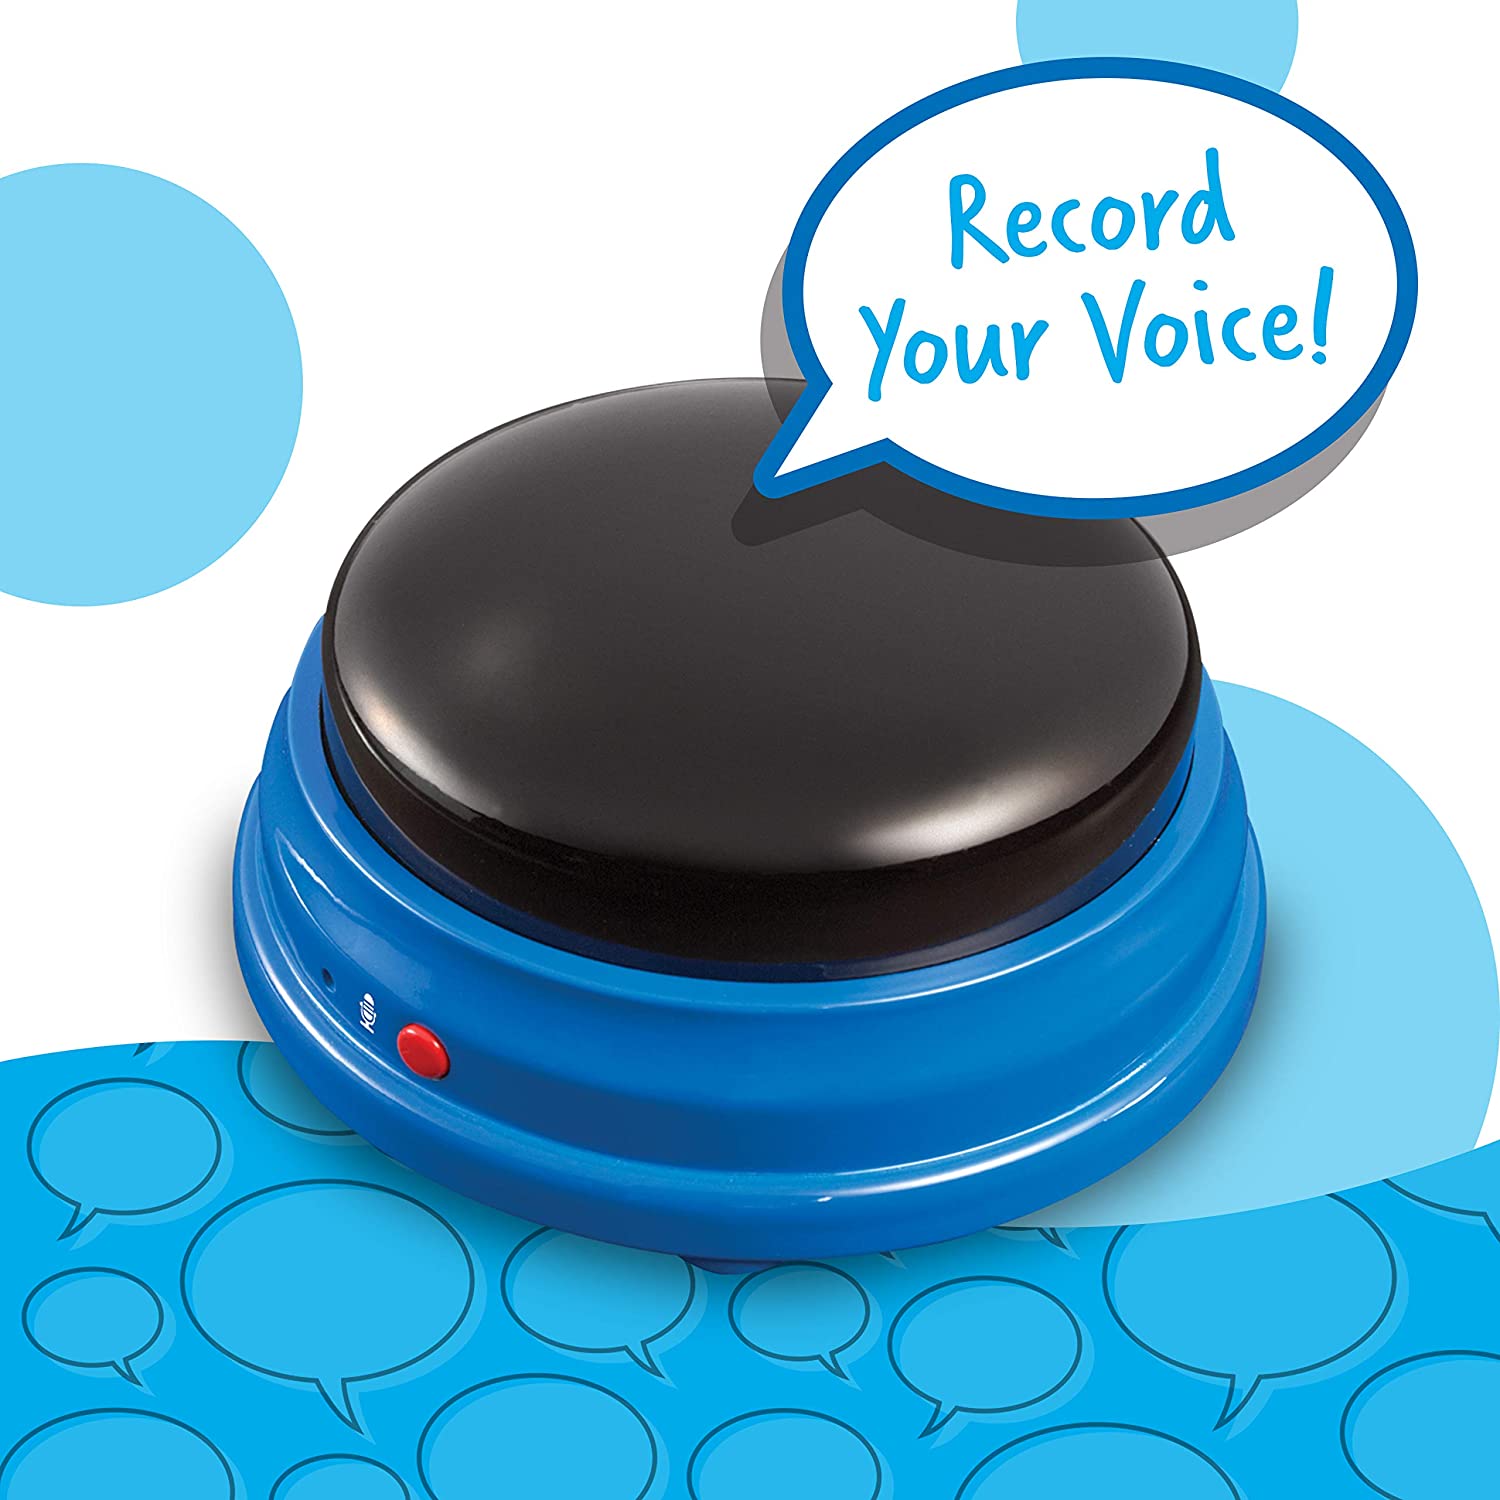 The blue Recordable Answer Buzzer.